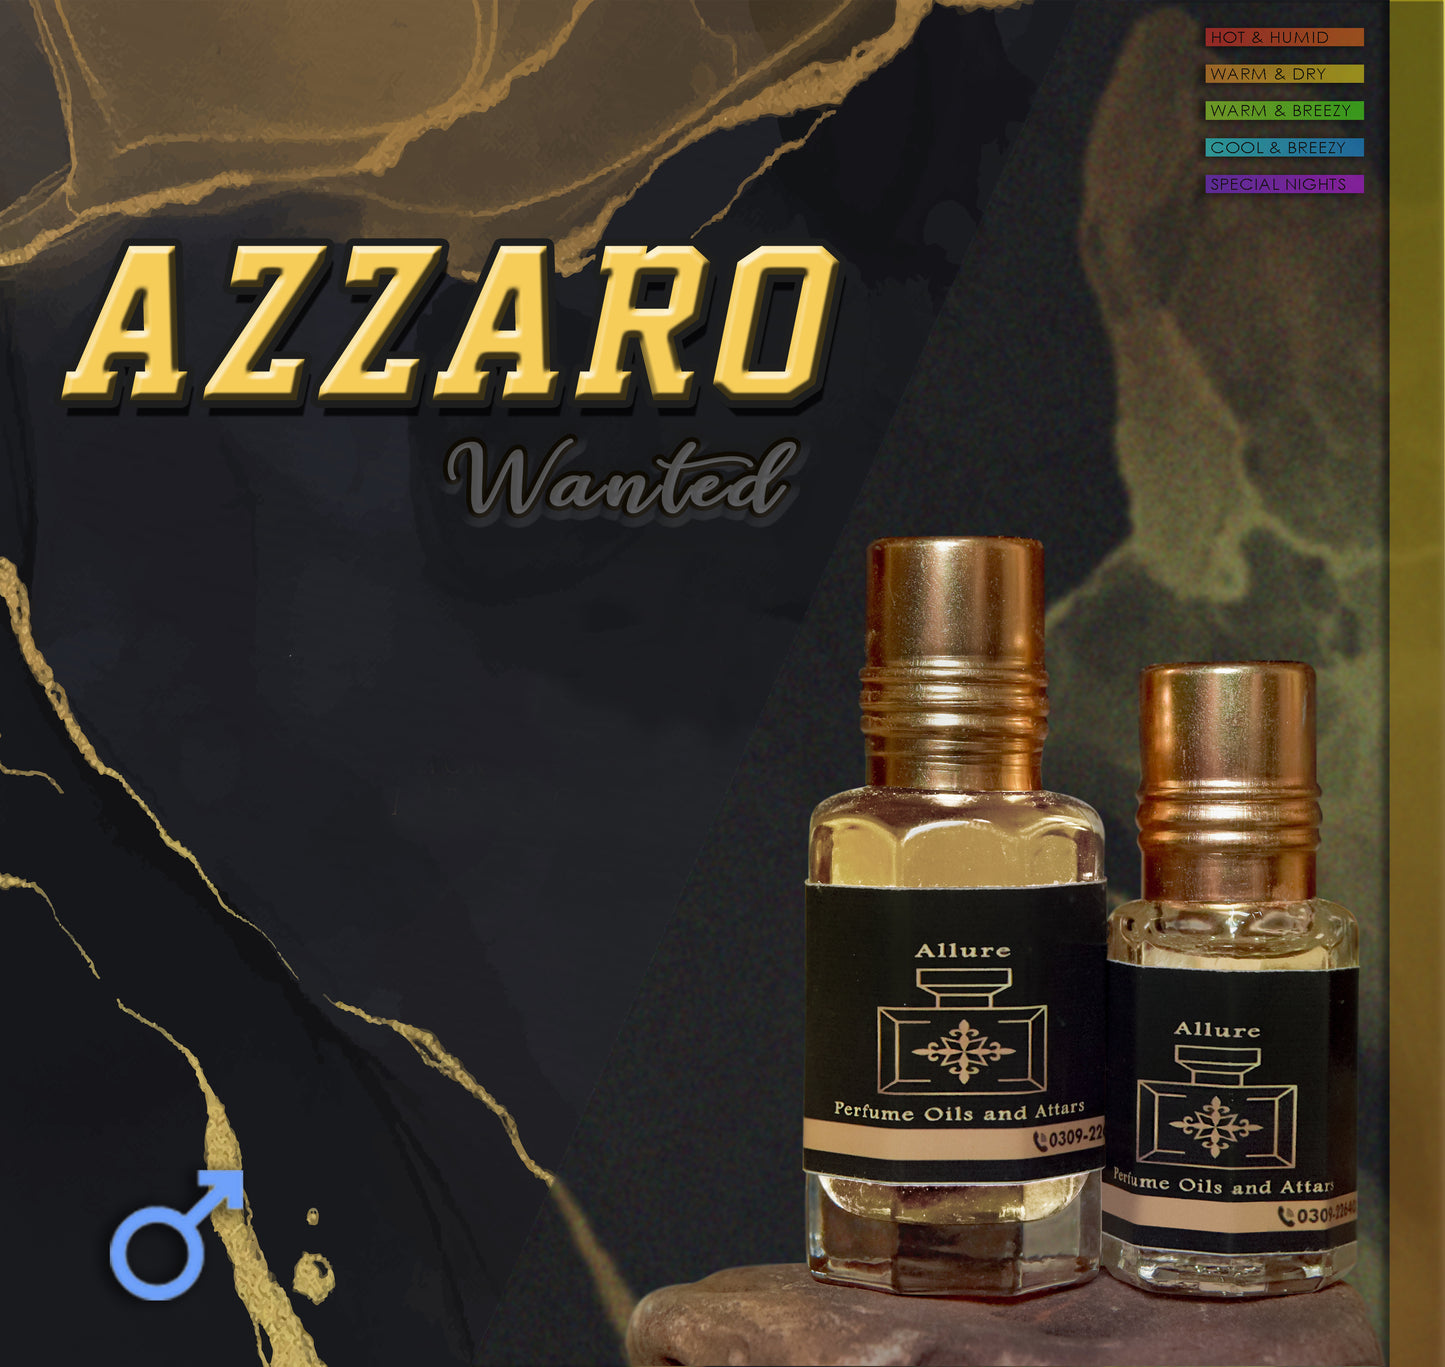 Azzaro Wanted attar in high quality